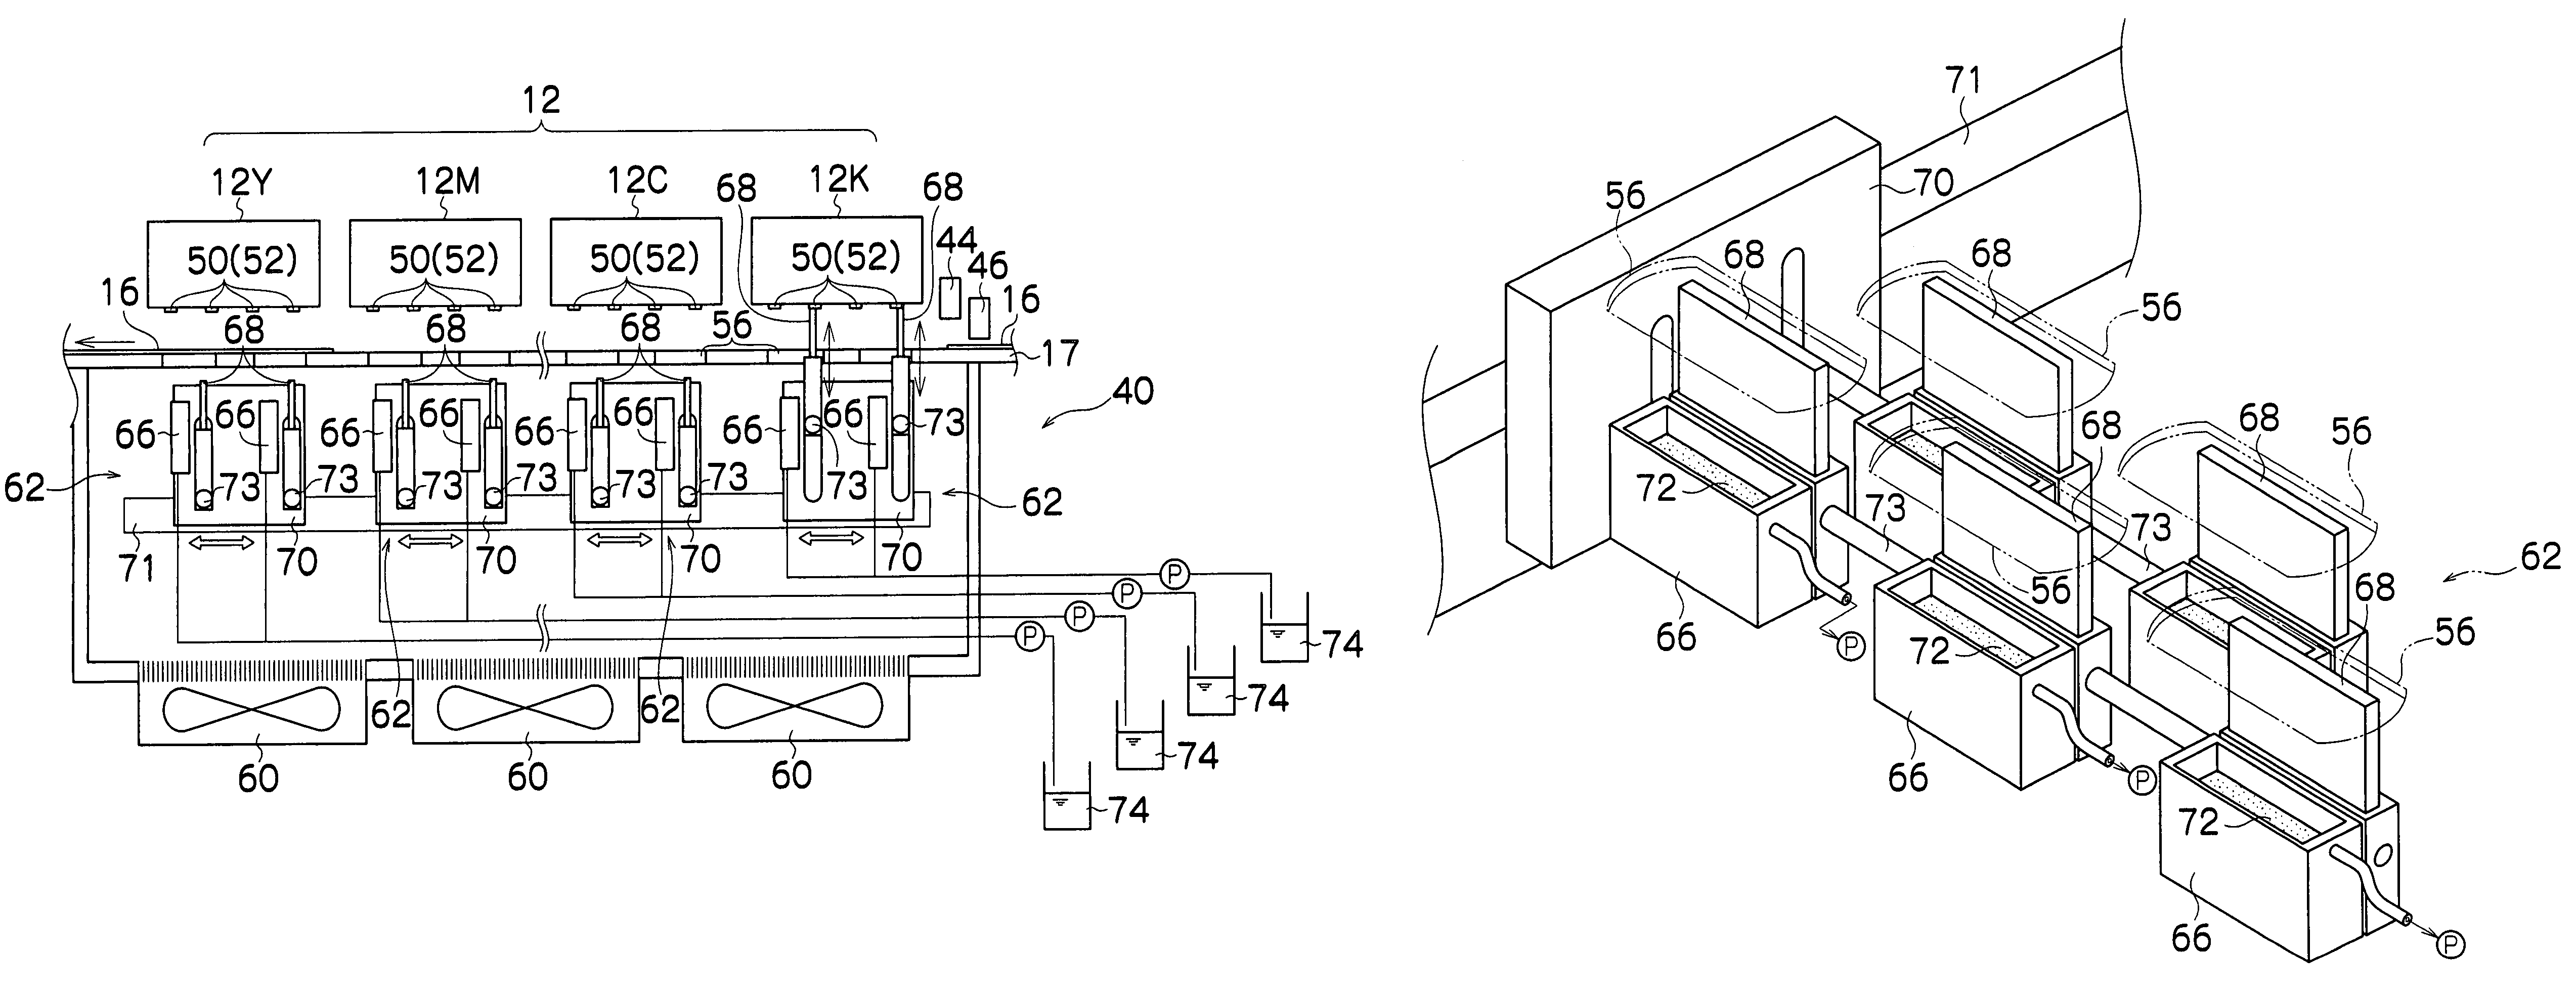 Image forming apparatus for performing restoration process